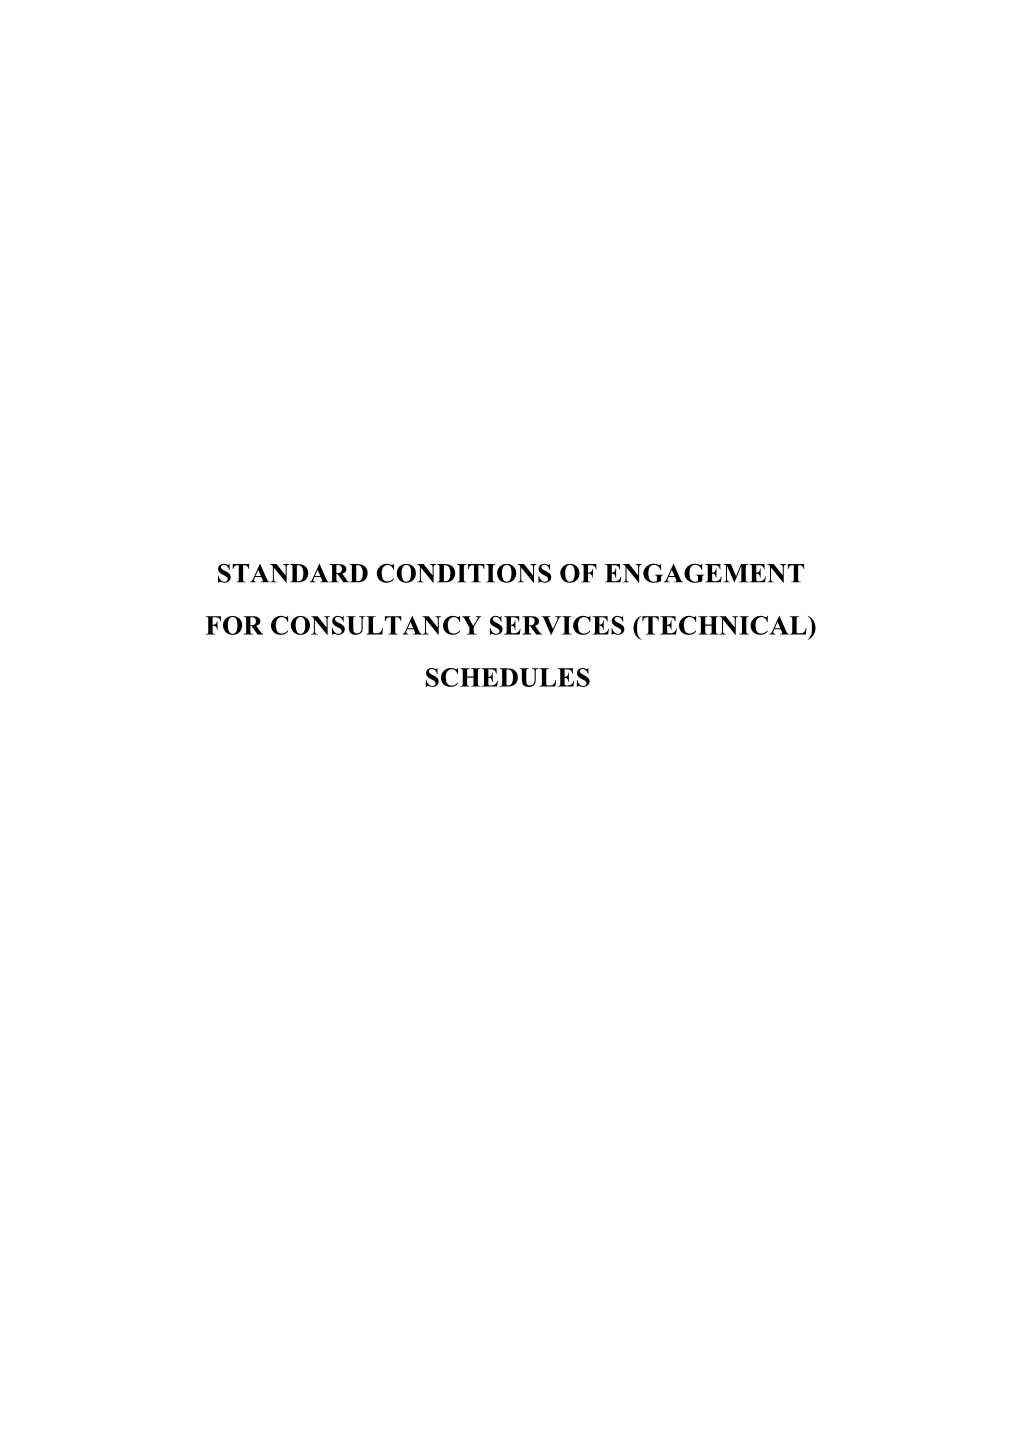 Tender & Schedule for the Conditions of Engagement for Consultancy Services (Technical)